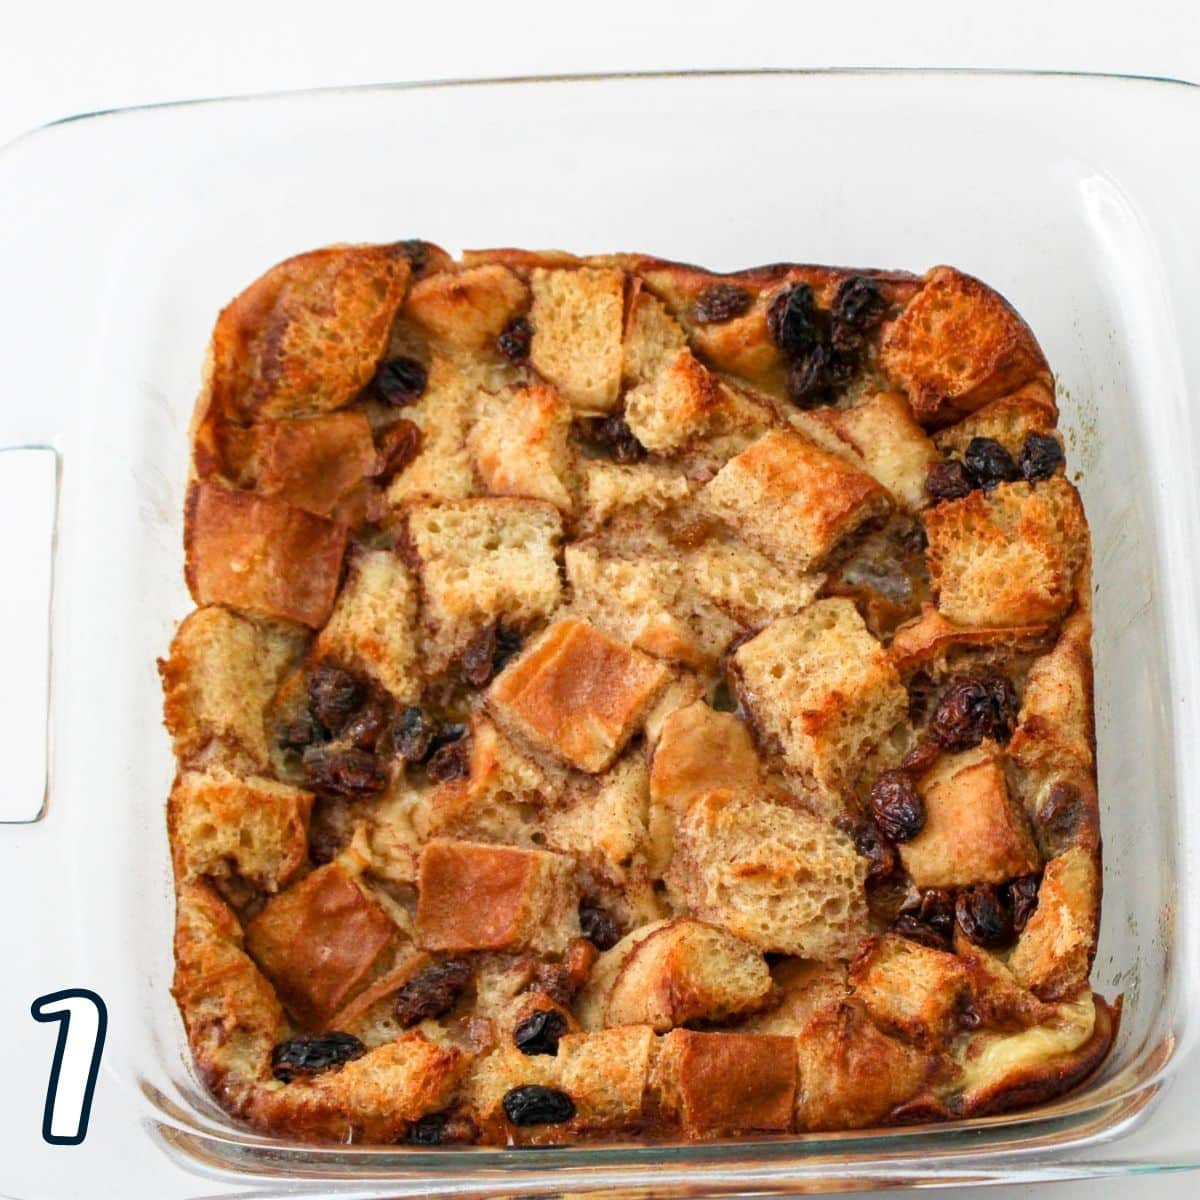 Just baked bread pudding in a square baking dish. 